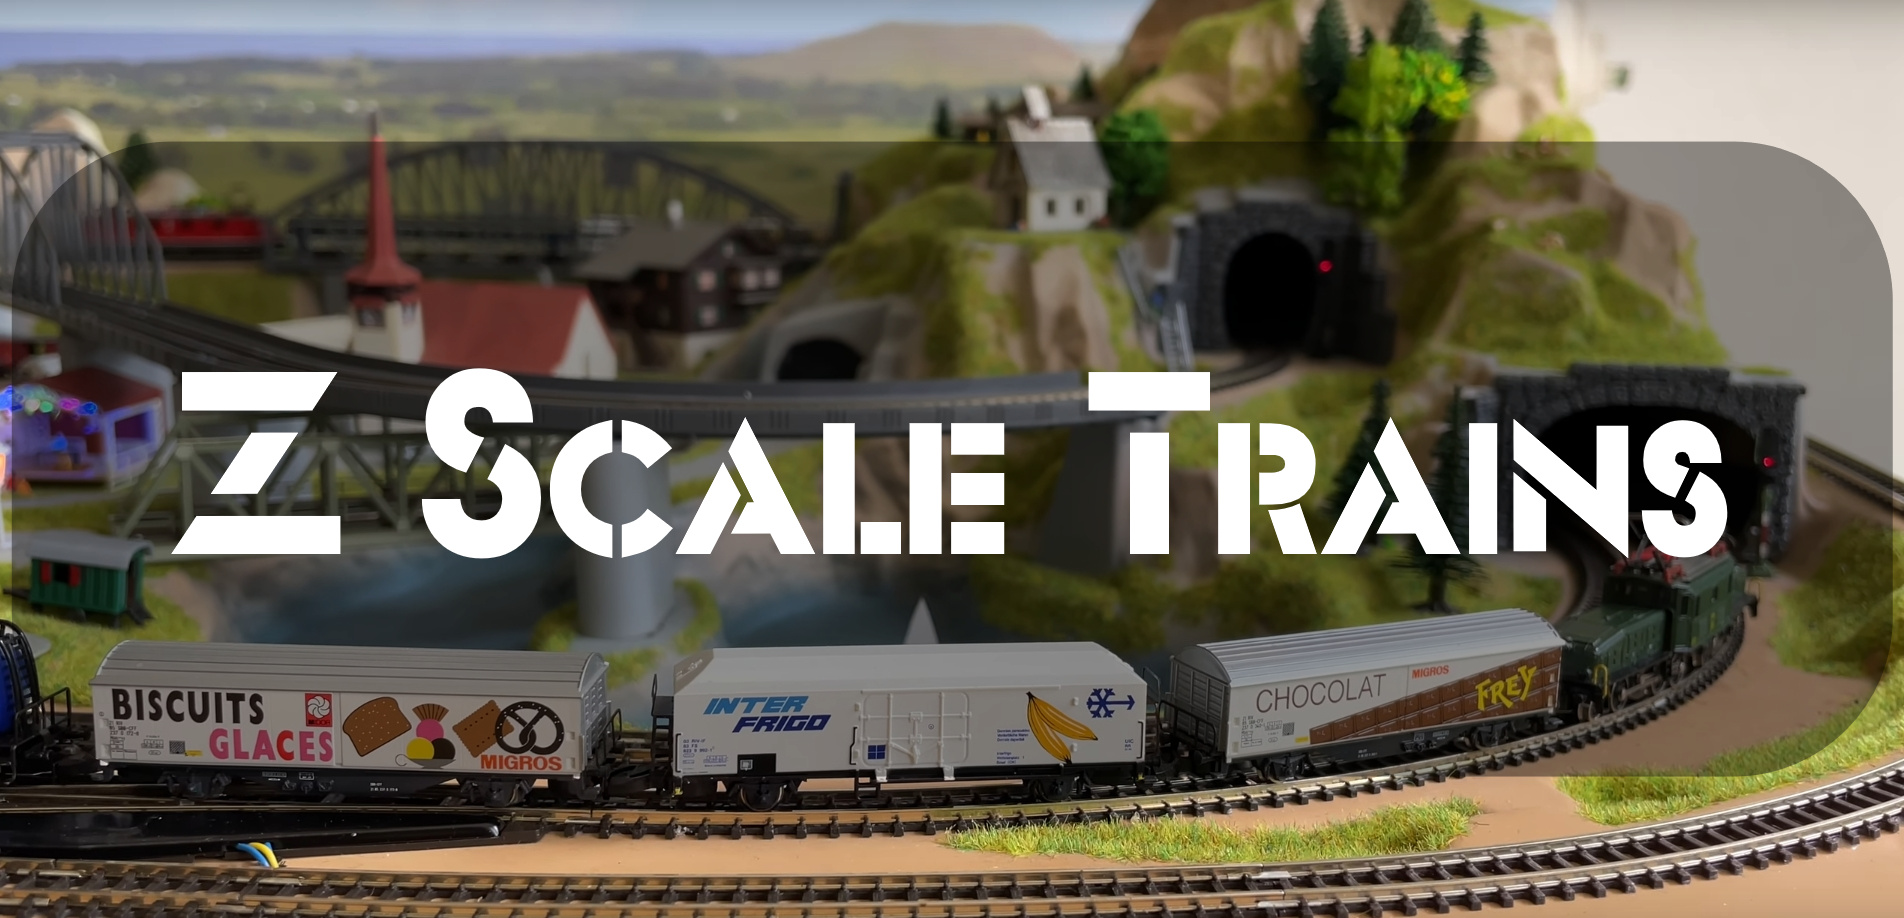 Z Scale Trains: The Perfect Hobby